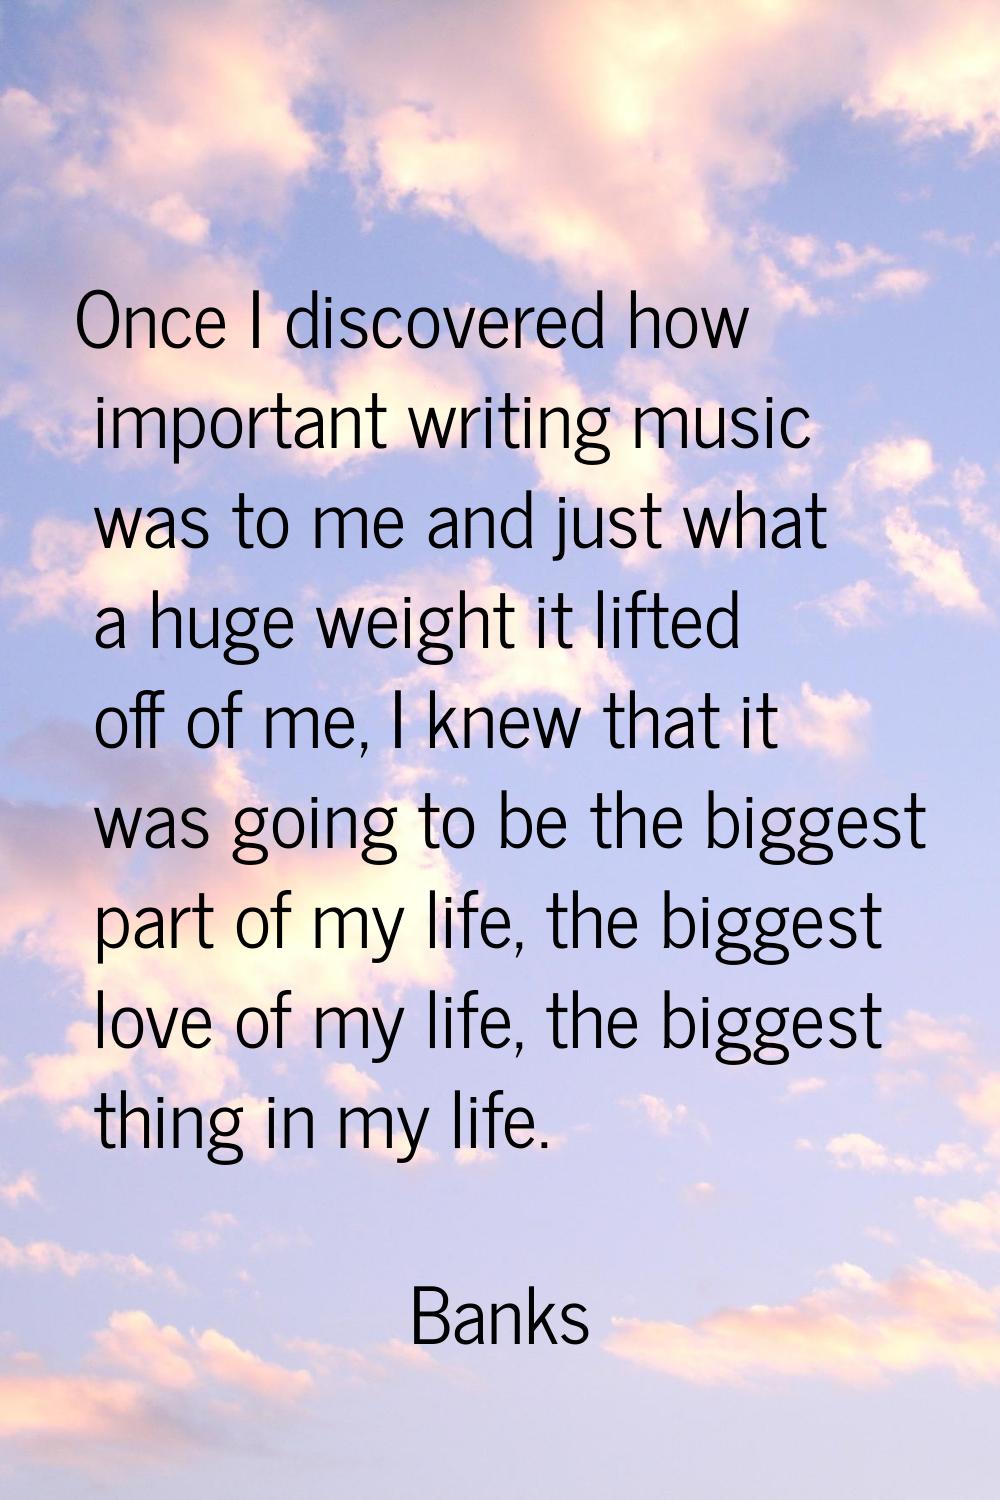 Once I discovered how important writing music was to me and just what a huge weight it lifted off o